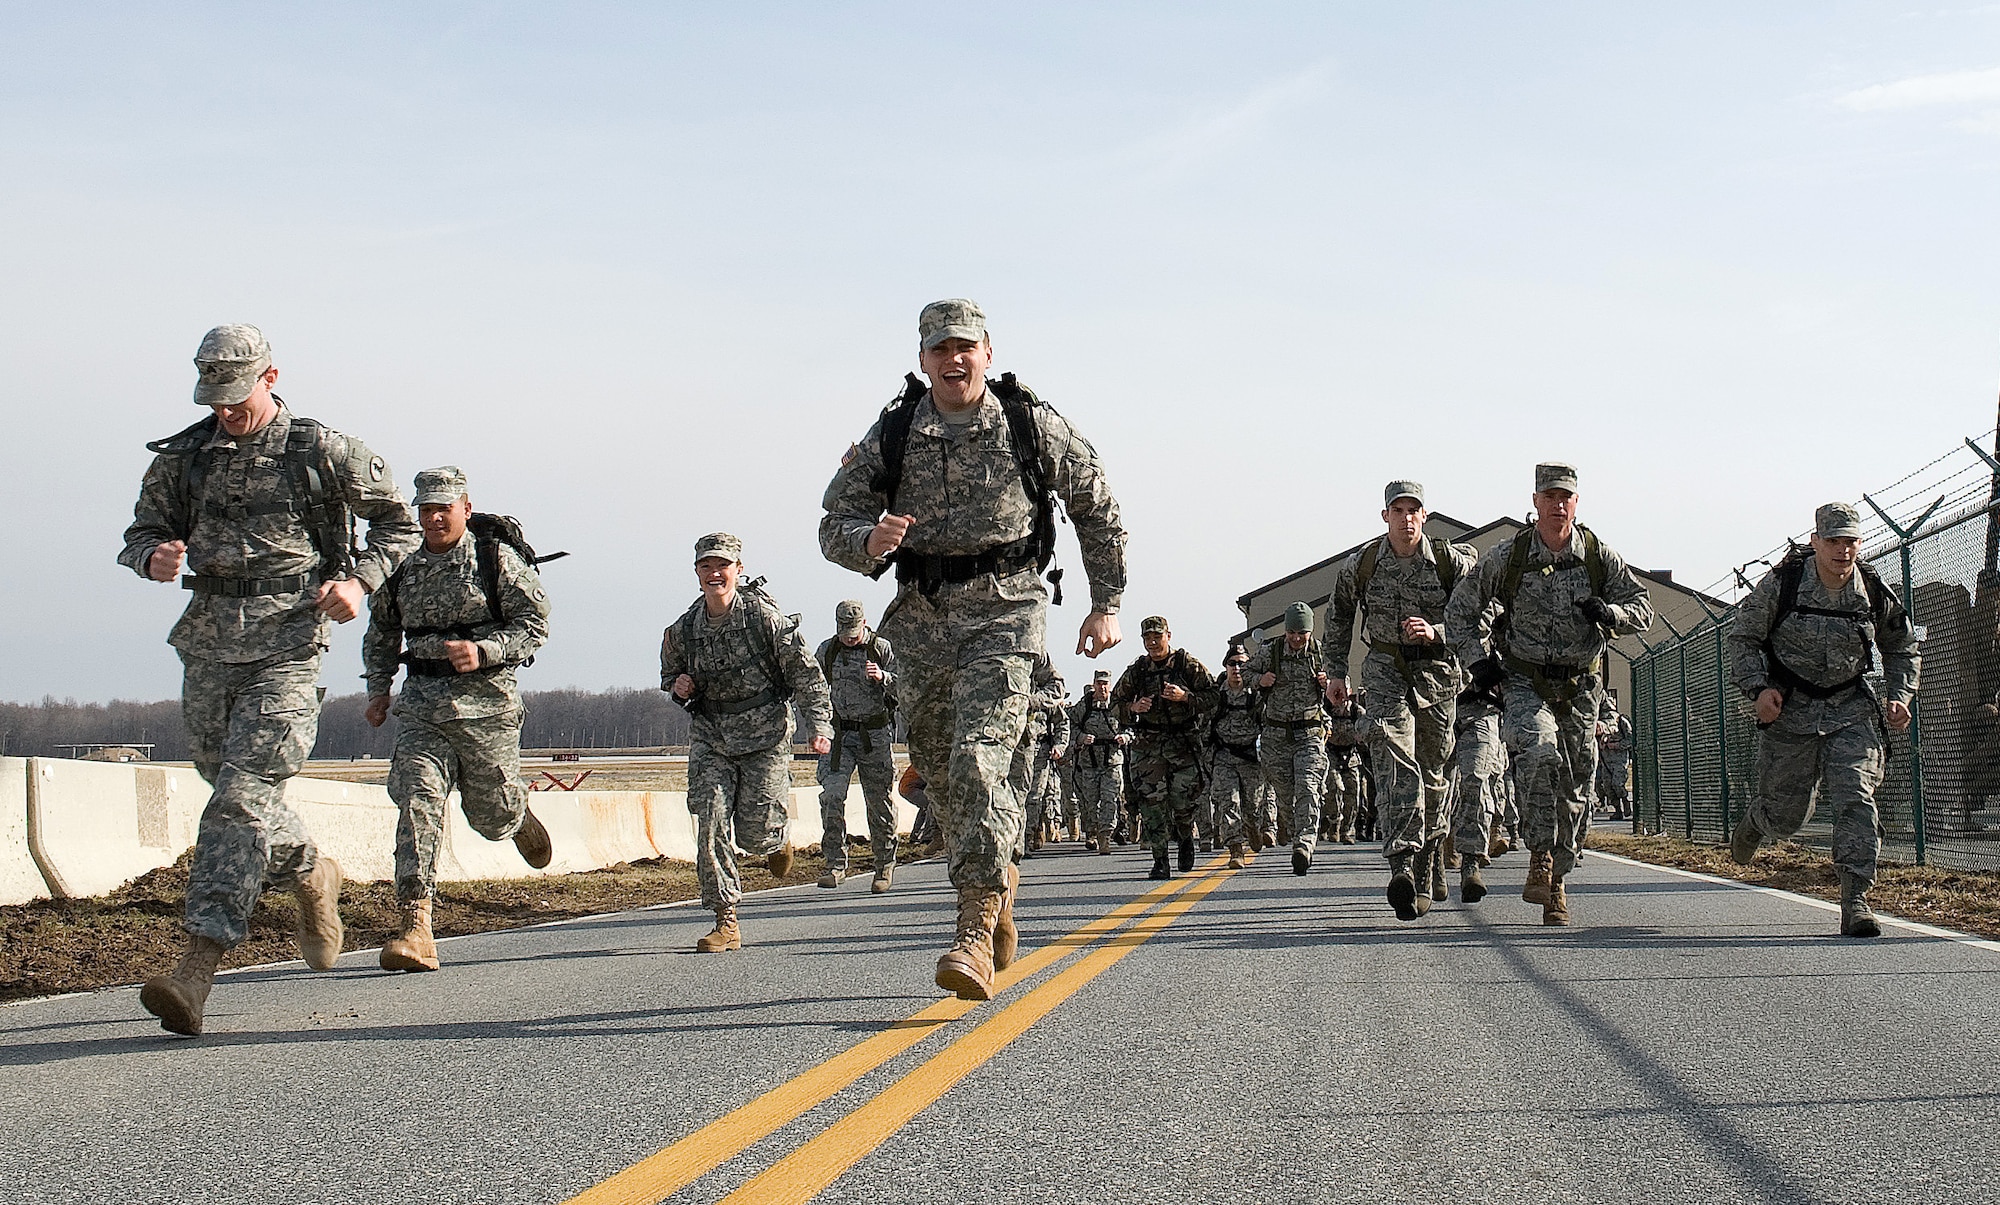 Participants in the 12th Annual Ruck March begin running the course, Feb. 26, 2011, at the Airlift Mobility Command museum, Dover Air Force Base, Del. Runners were required to wear 30-pound rucksacks throughout the 6.2-mile circuit.